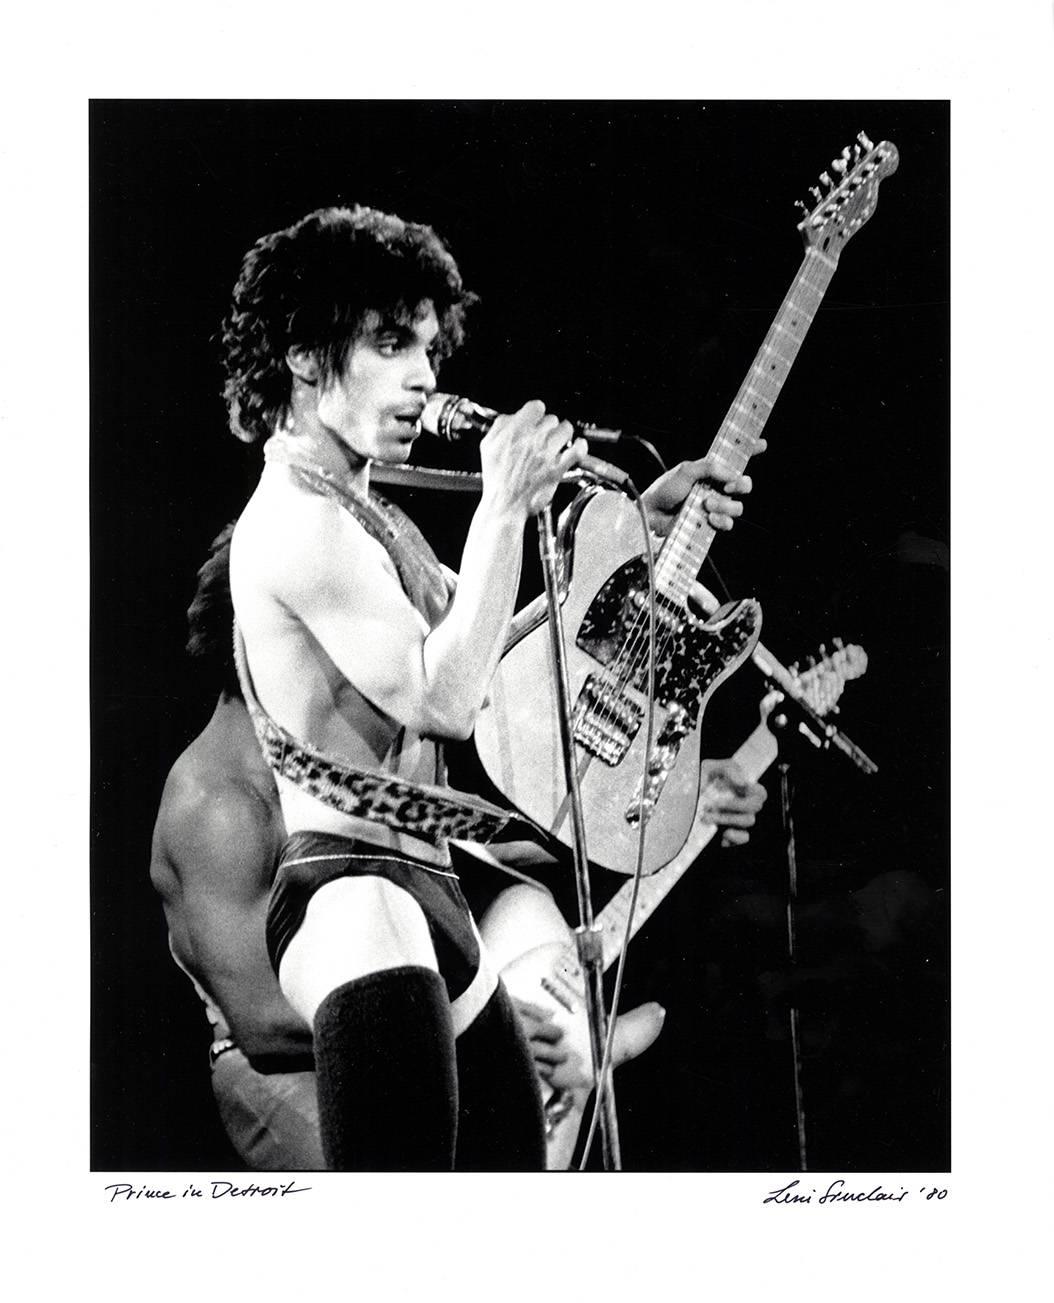 Prince Detroit 1980:
A standout, hand signed photograph of the late all-time great Prince, shot by legendary Detroit photographer Leni Sinclair, 2016's Kresge Foundation's Eminent Artist of 2016 (See The Guardian UK Photo Section, Jan. 28, 2016):